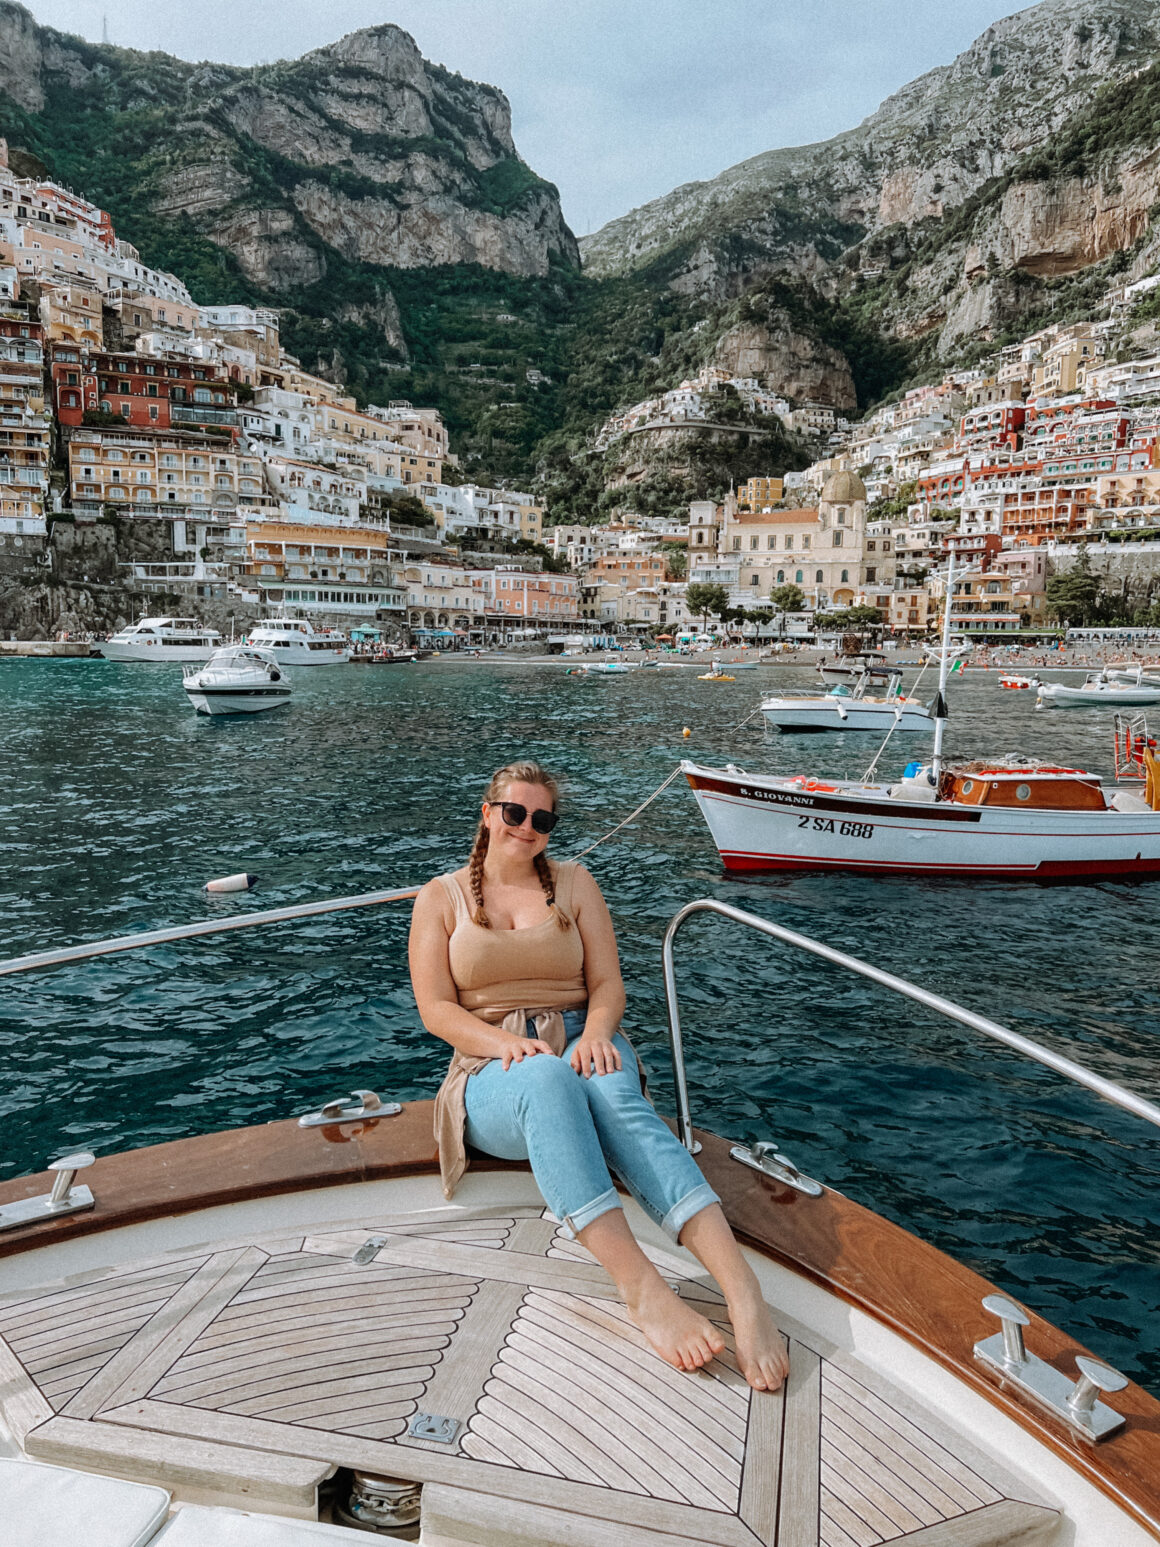 A girl poses on a boat off the coast of Positano one of the best things to do in Positano